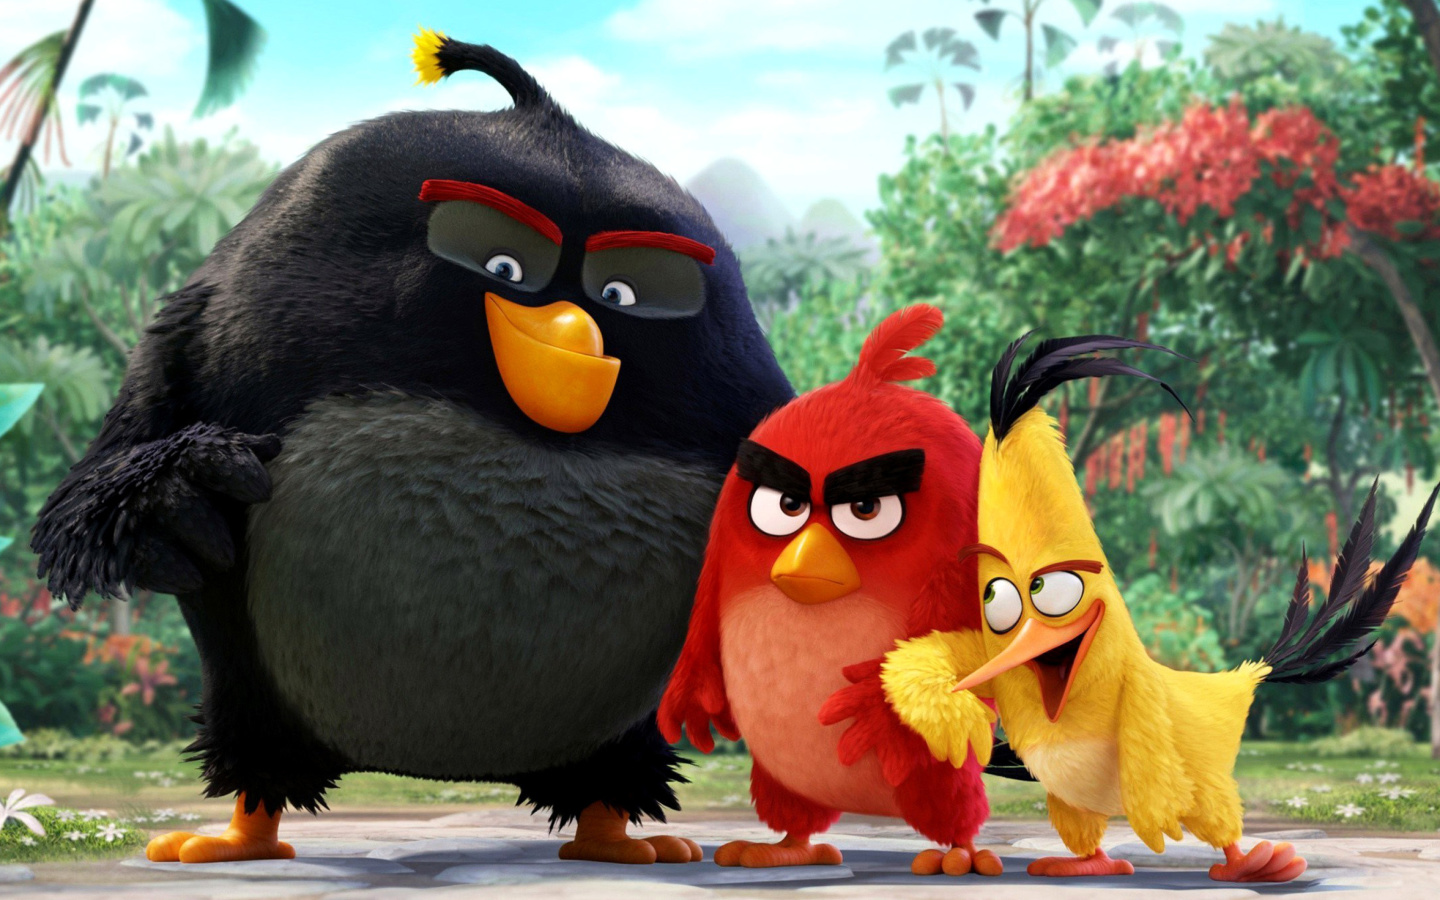 The Angry Birds Comedy Movie 2016 wallpaper 1440x900